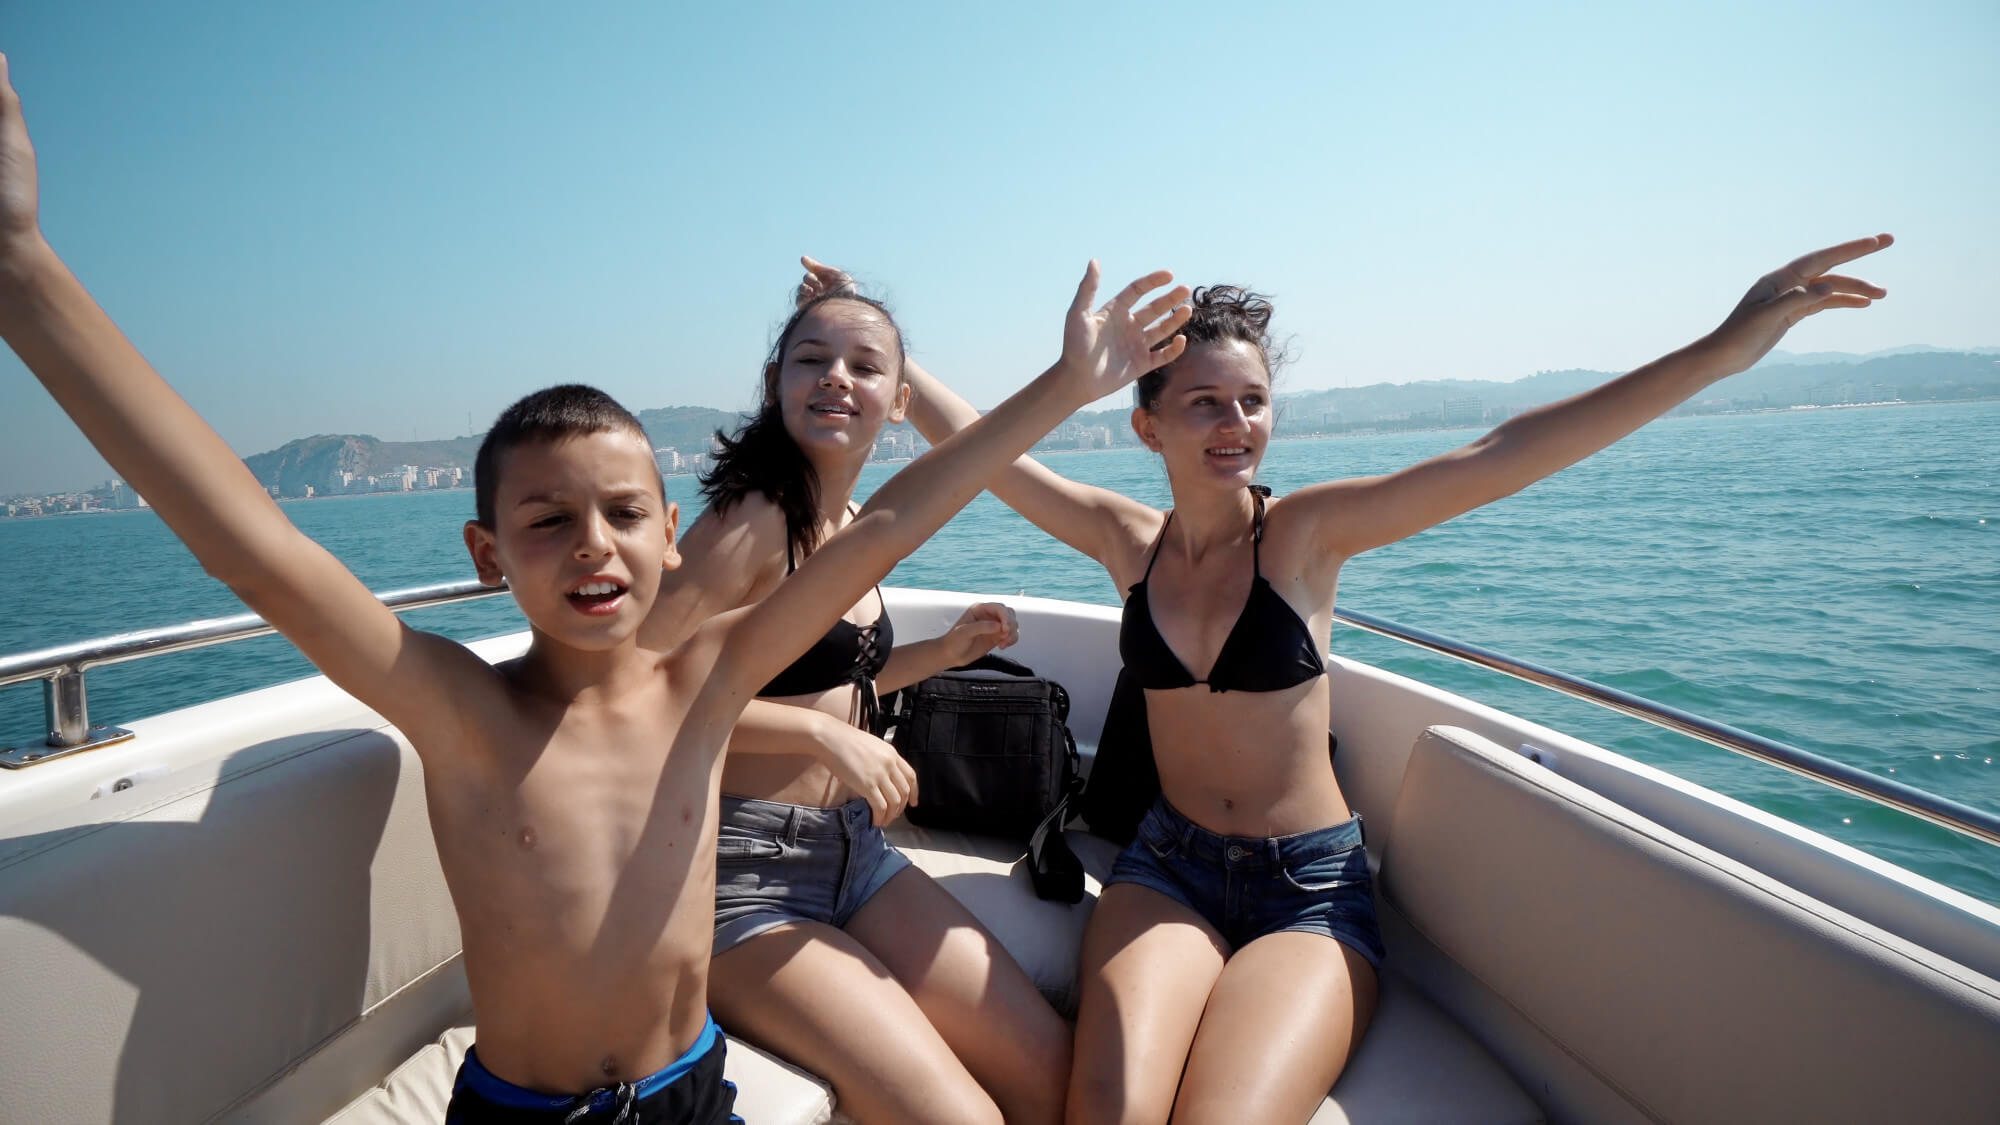 School's Out for Summer 3 of the Best Cruises for Teens to Take This Year